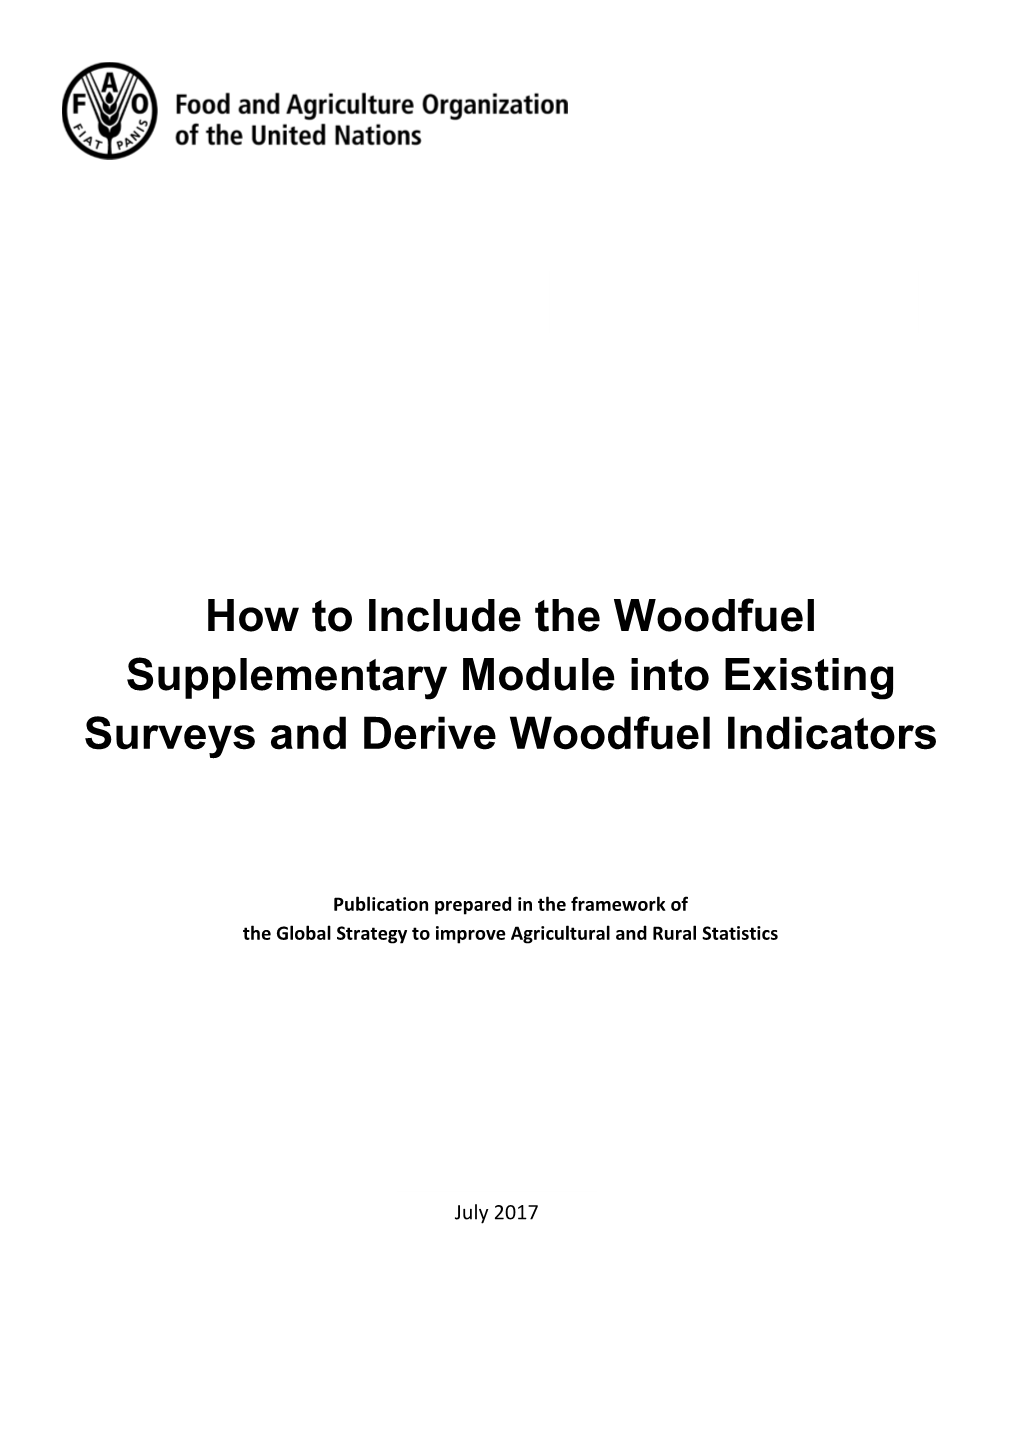 How to Include the Wood Fuel Supplementary Module Into